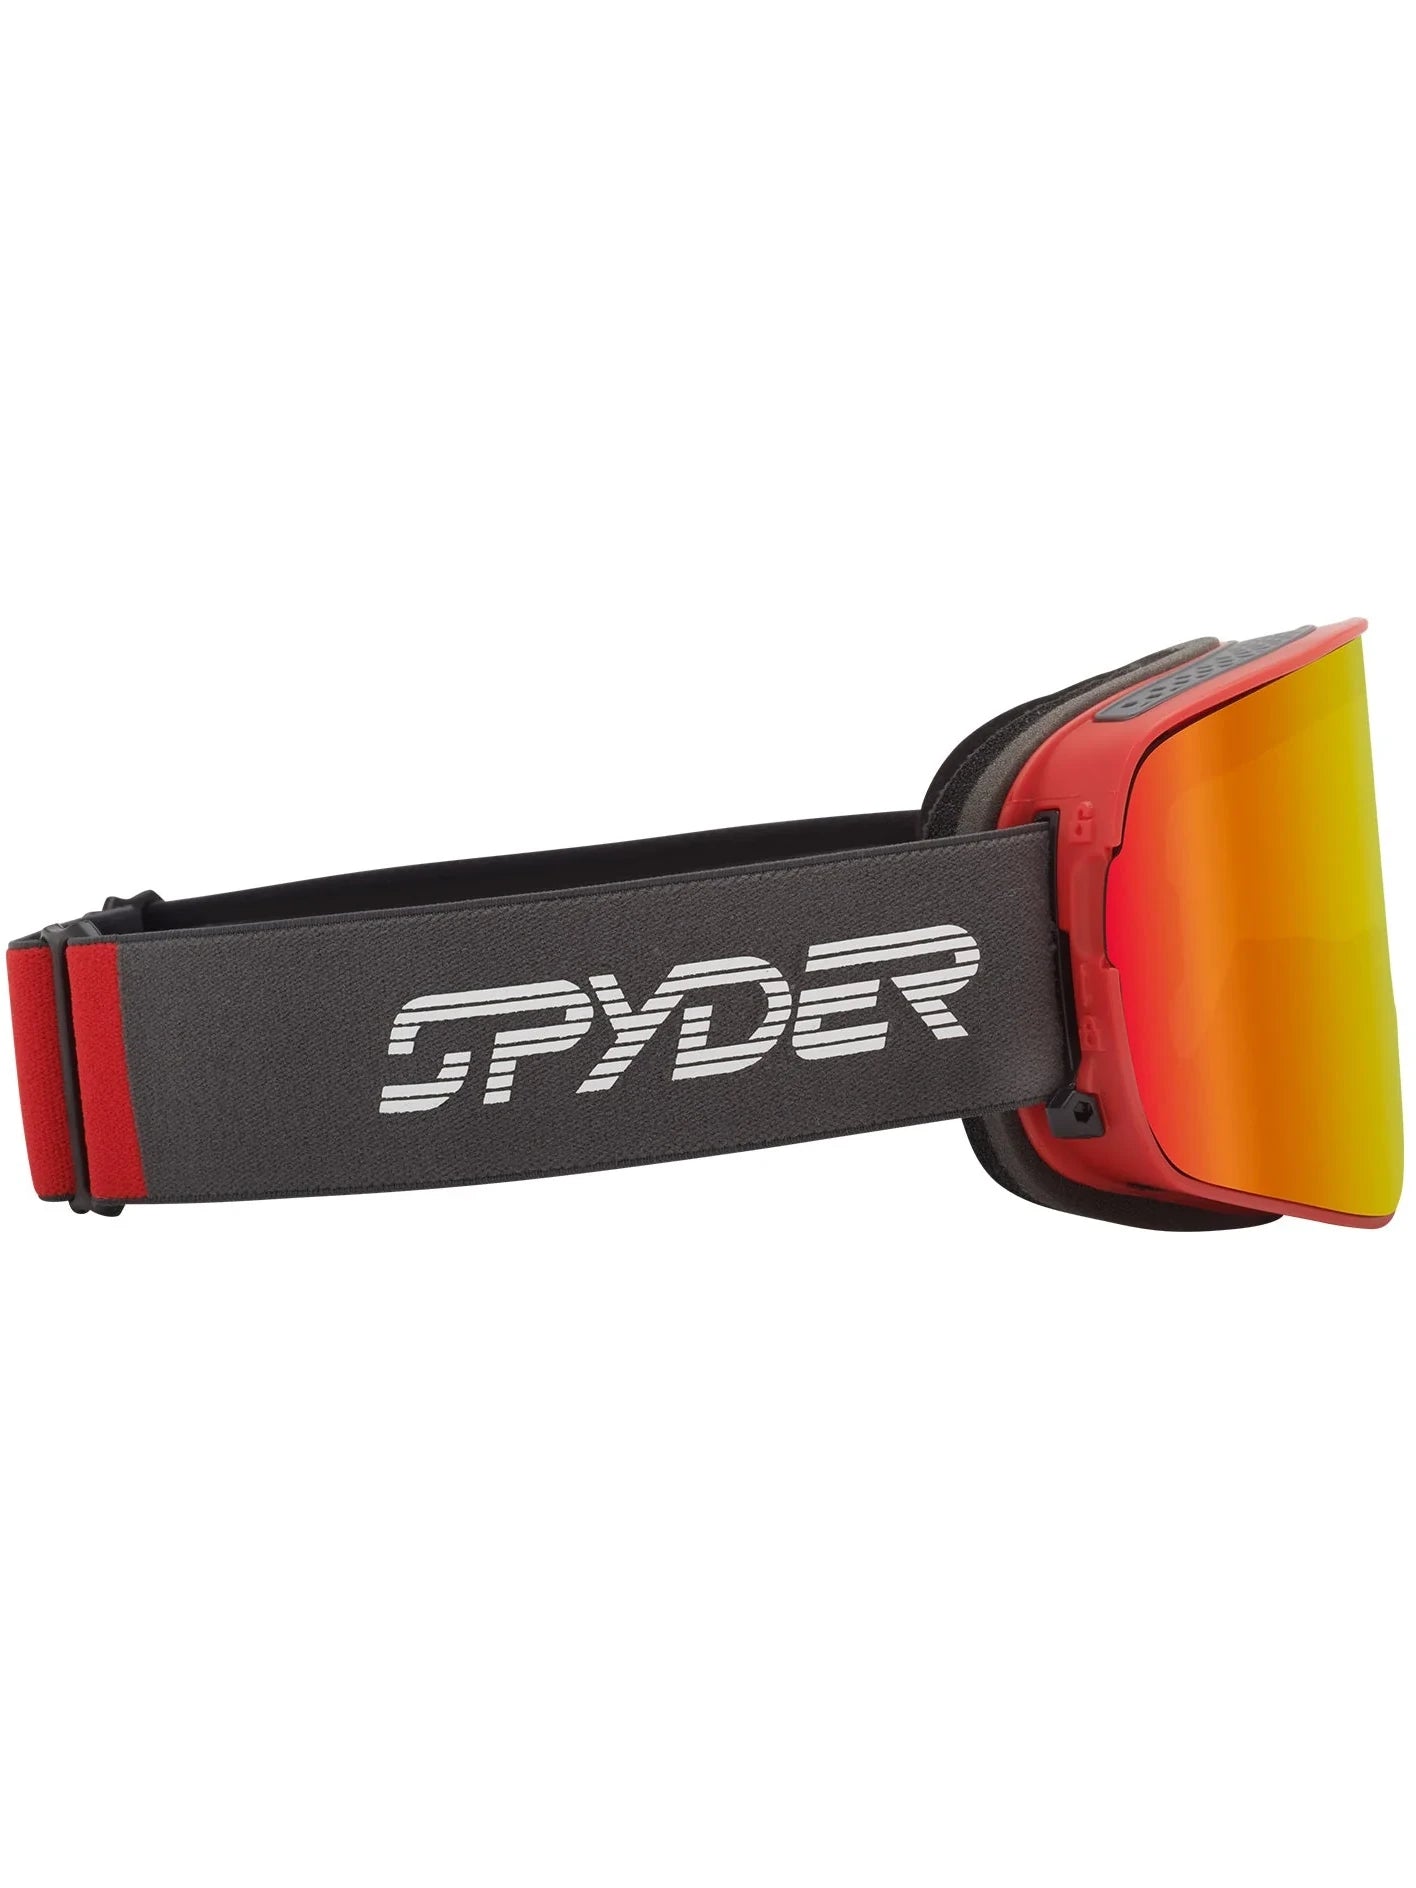 Dragon NFX2 - Volcano Spyder Collab with Lumalens Red Ionized & Lumalens Light Rose Lens